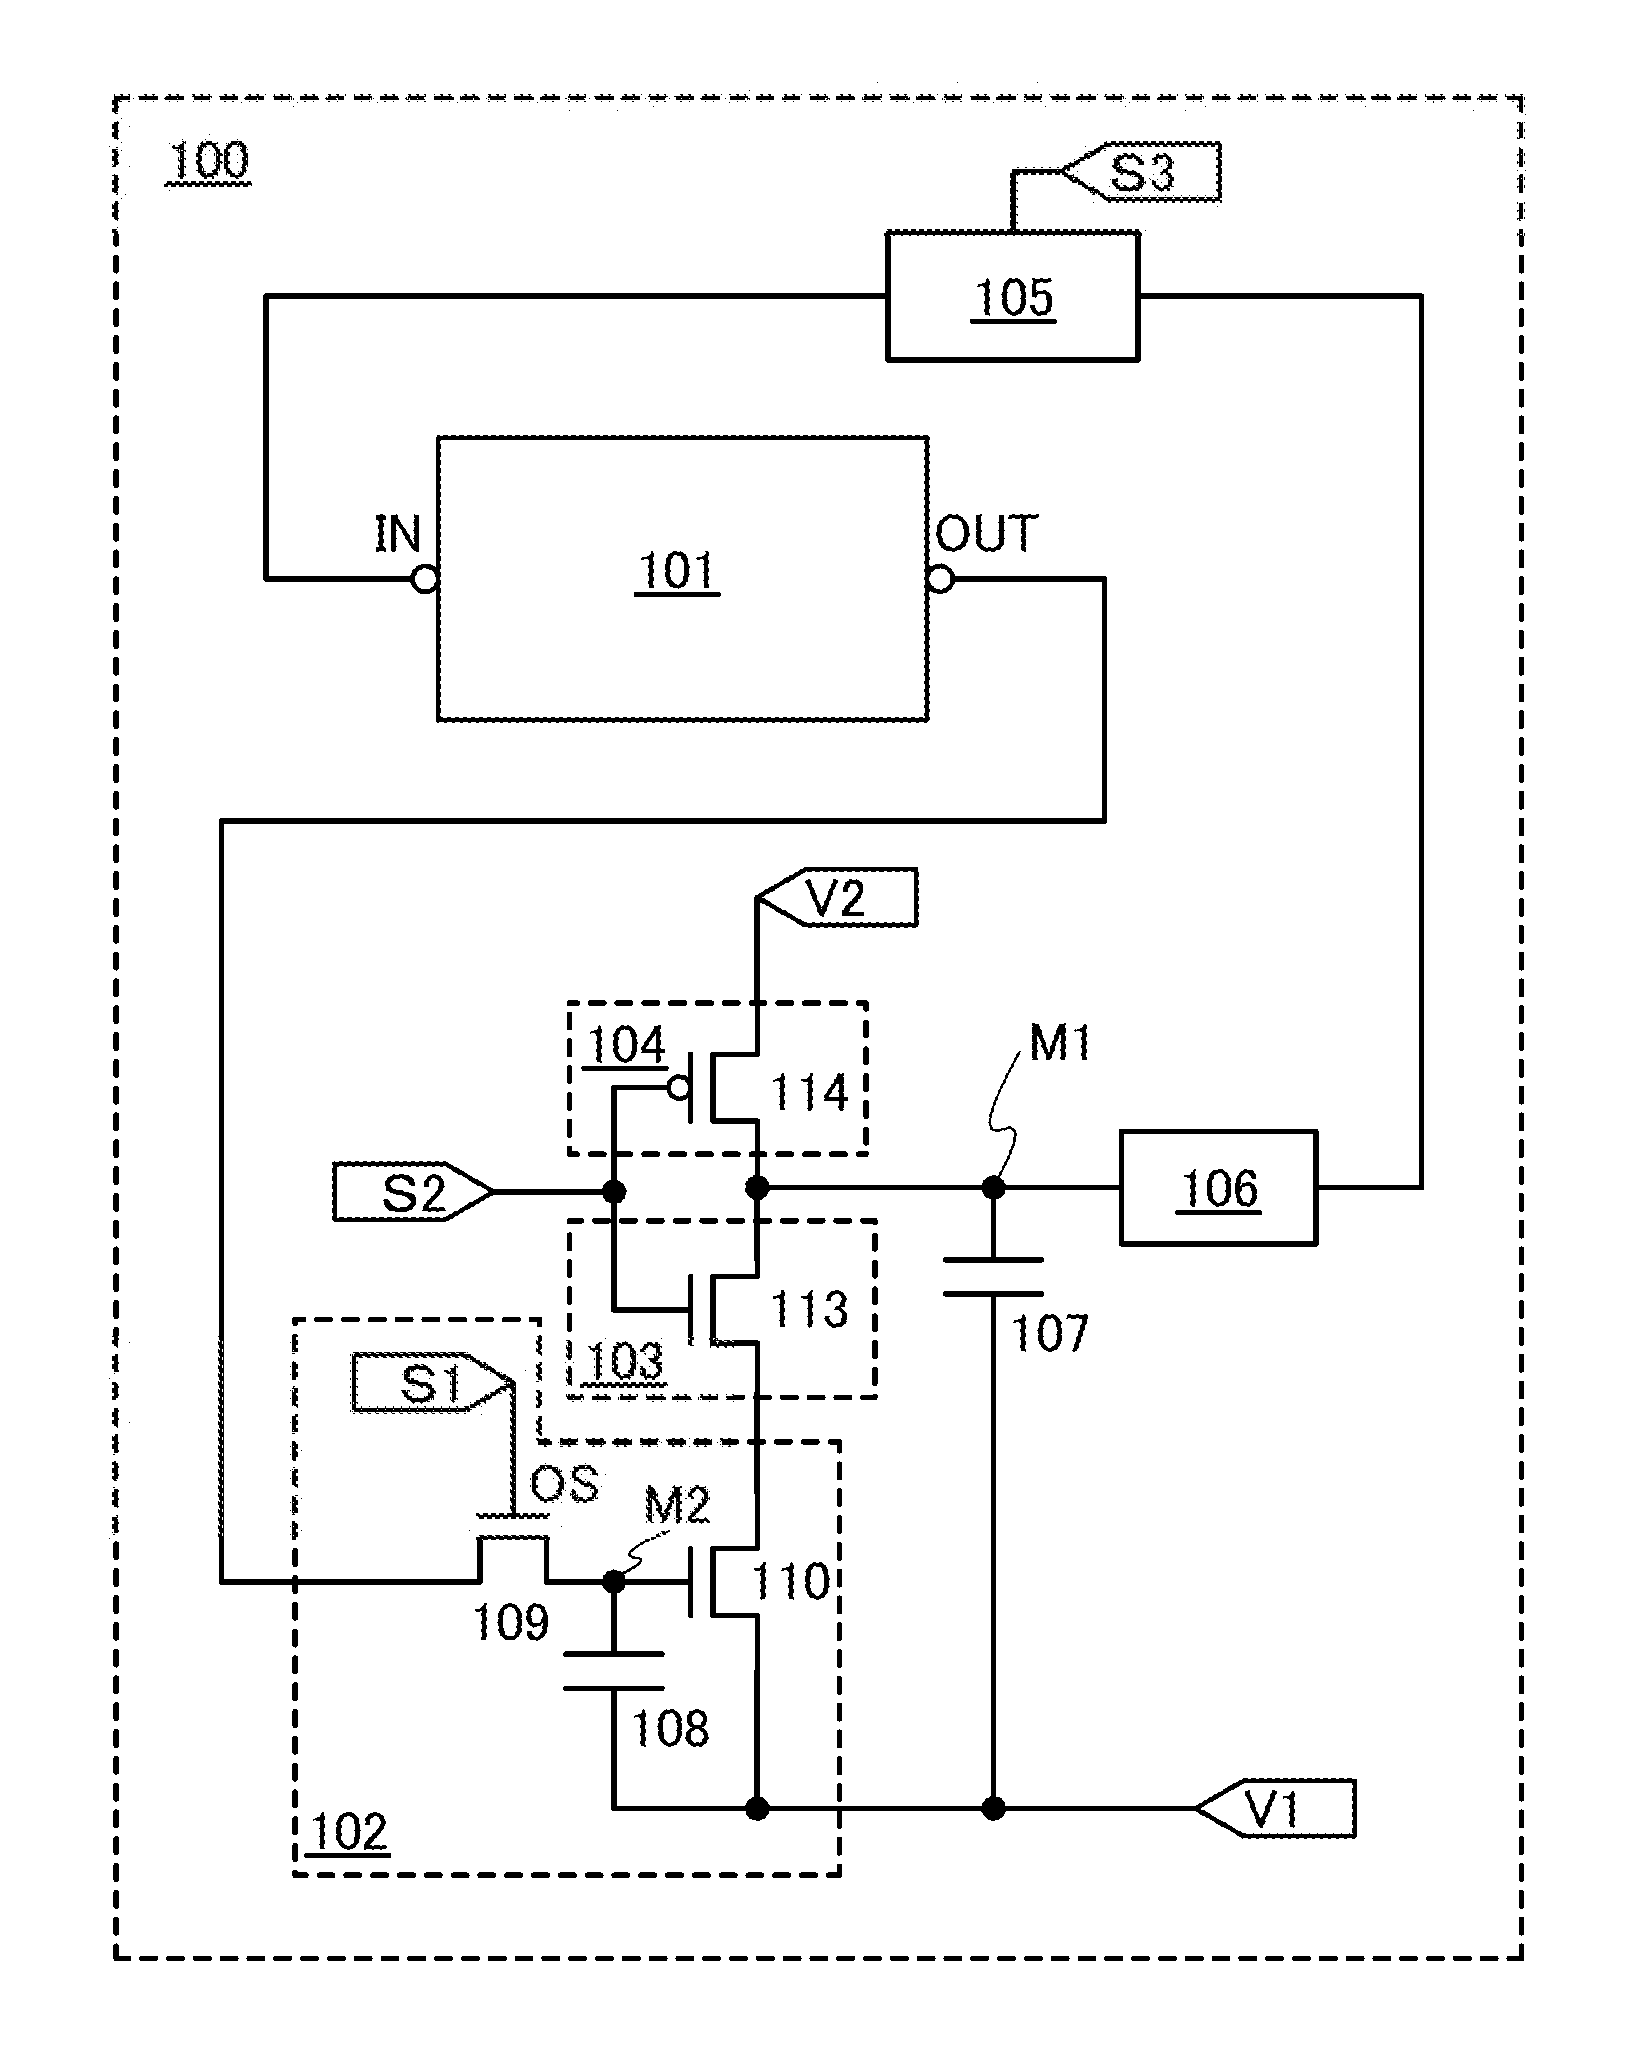 Storage element, storage device, and signal processing circuit